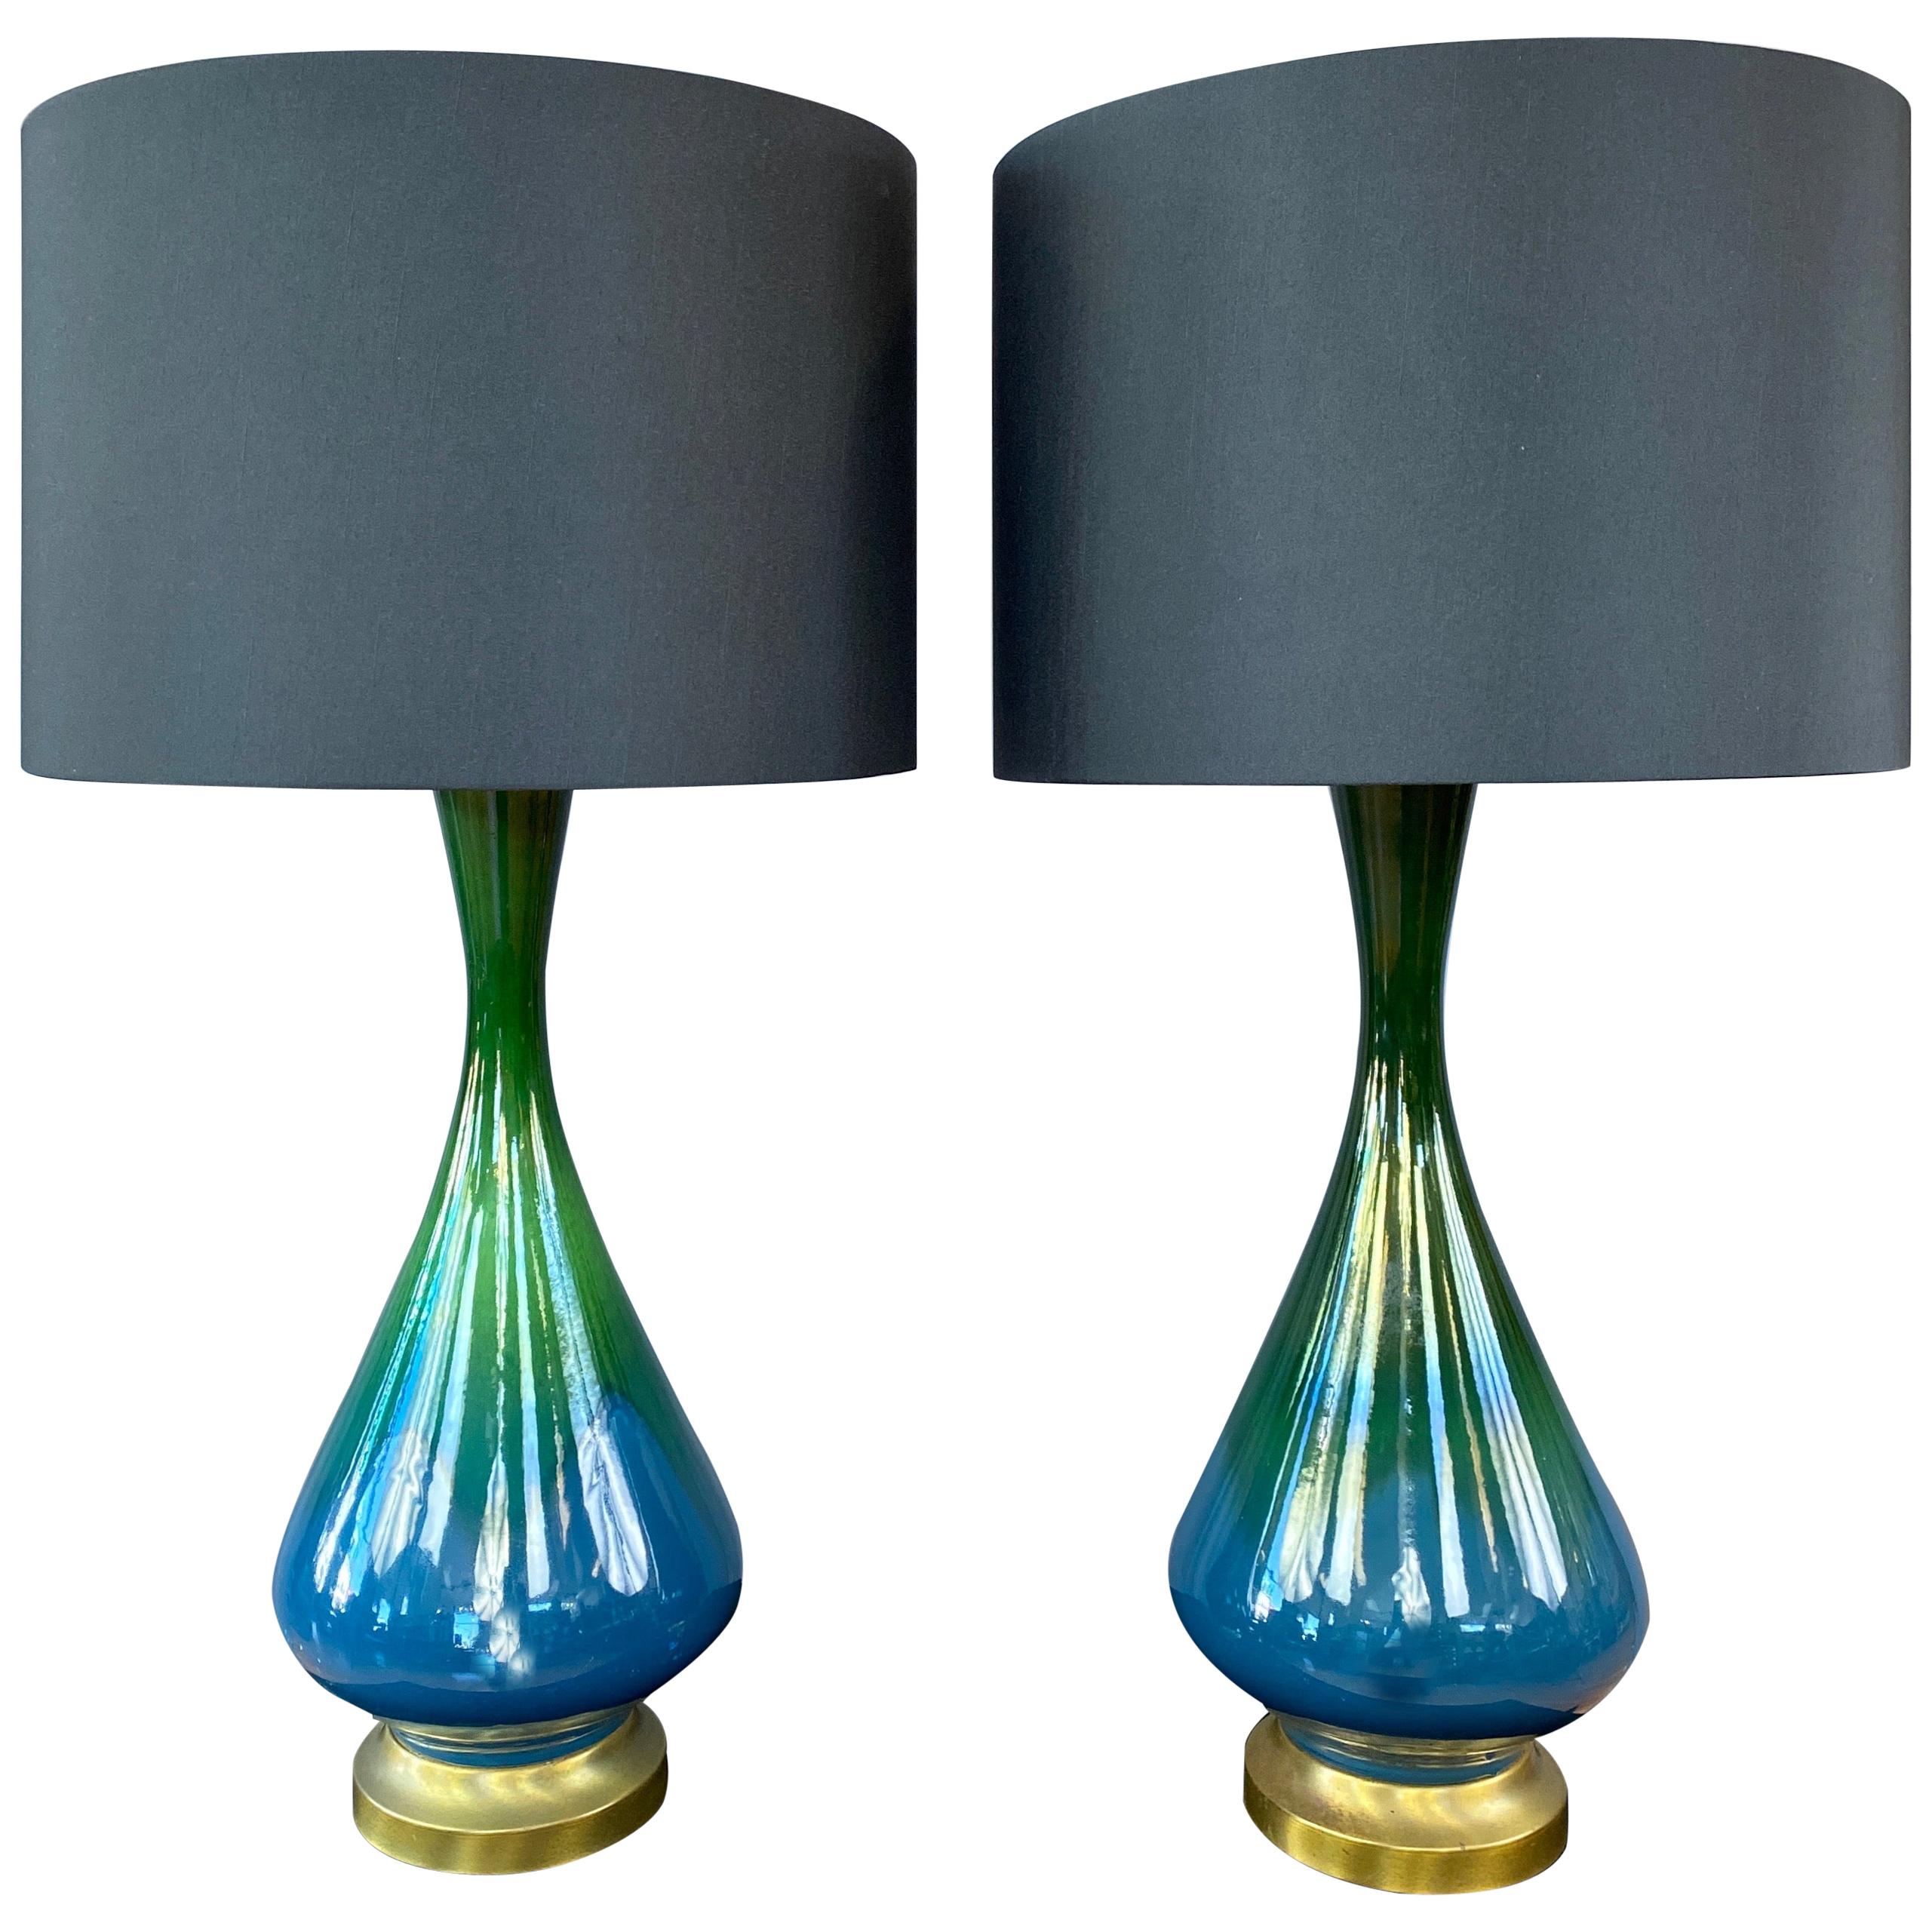 Pair of Blue-Green Ombré Glaze Ceramic and Brass Table Lamps with Shades, 1950s